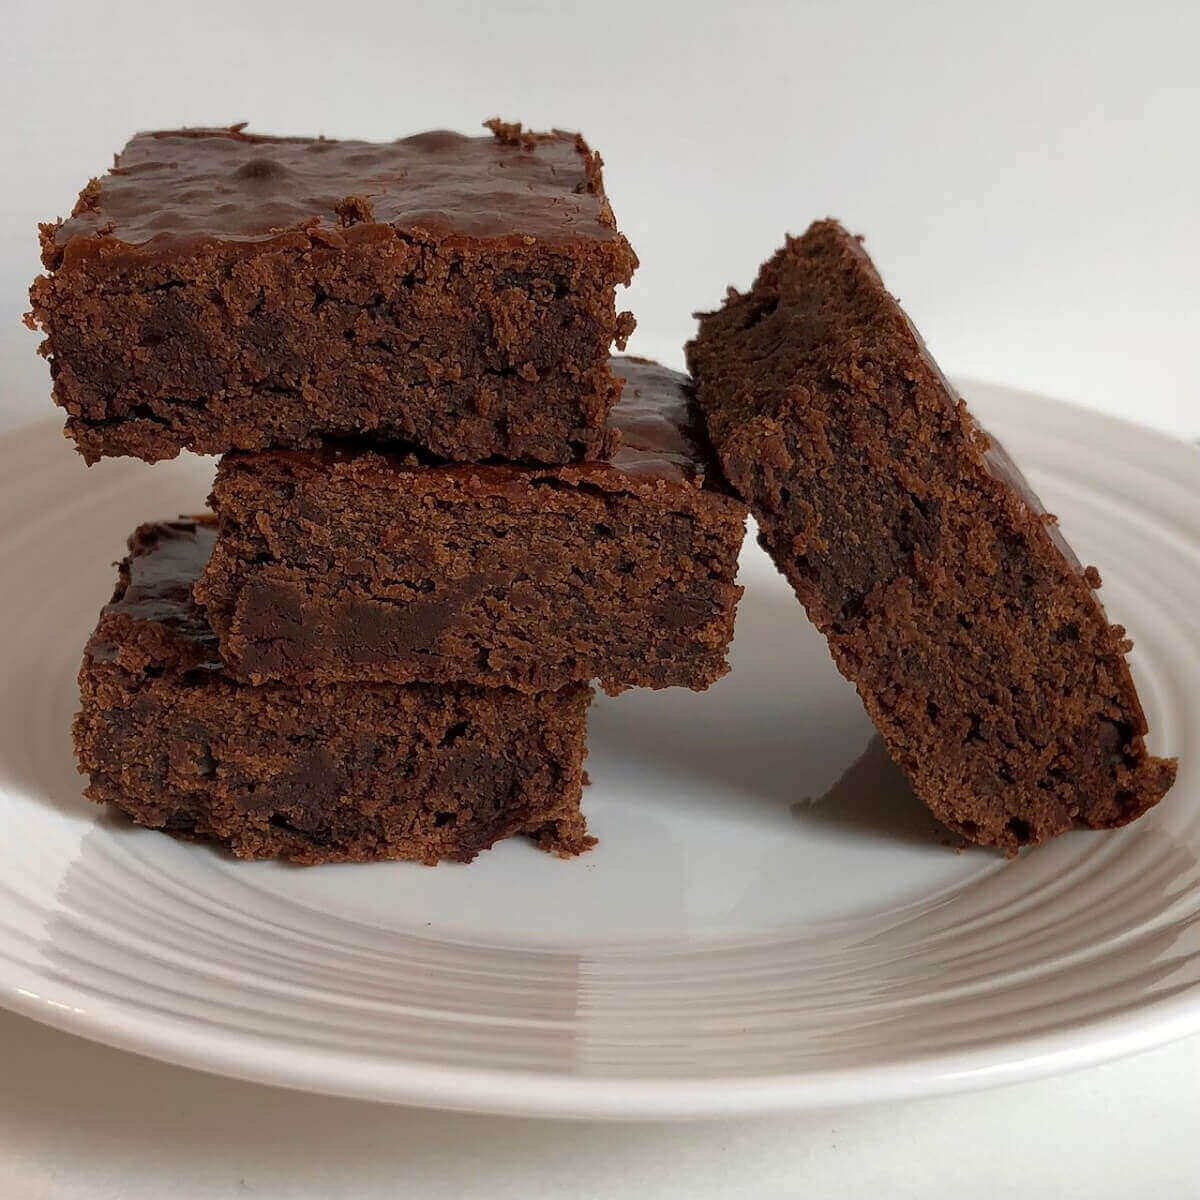 Four chickpea flour brownies on a plate.